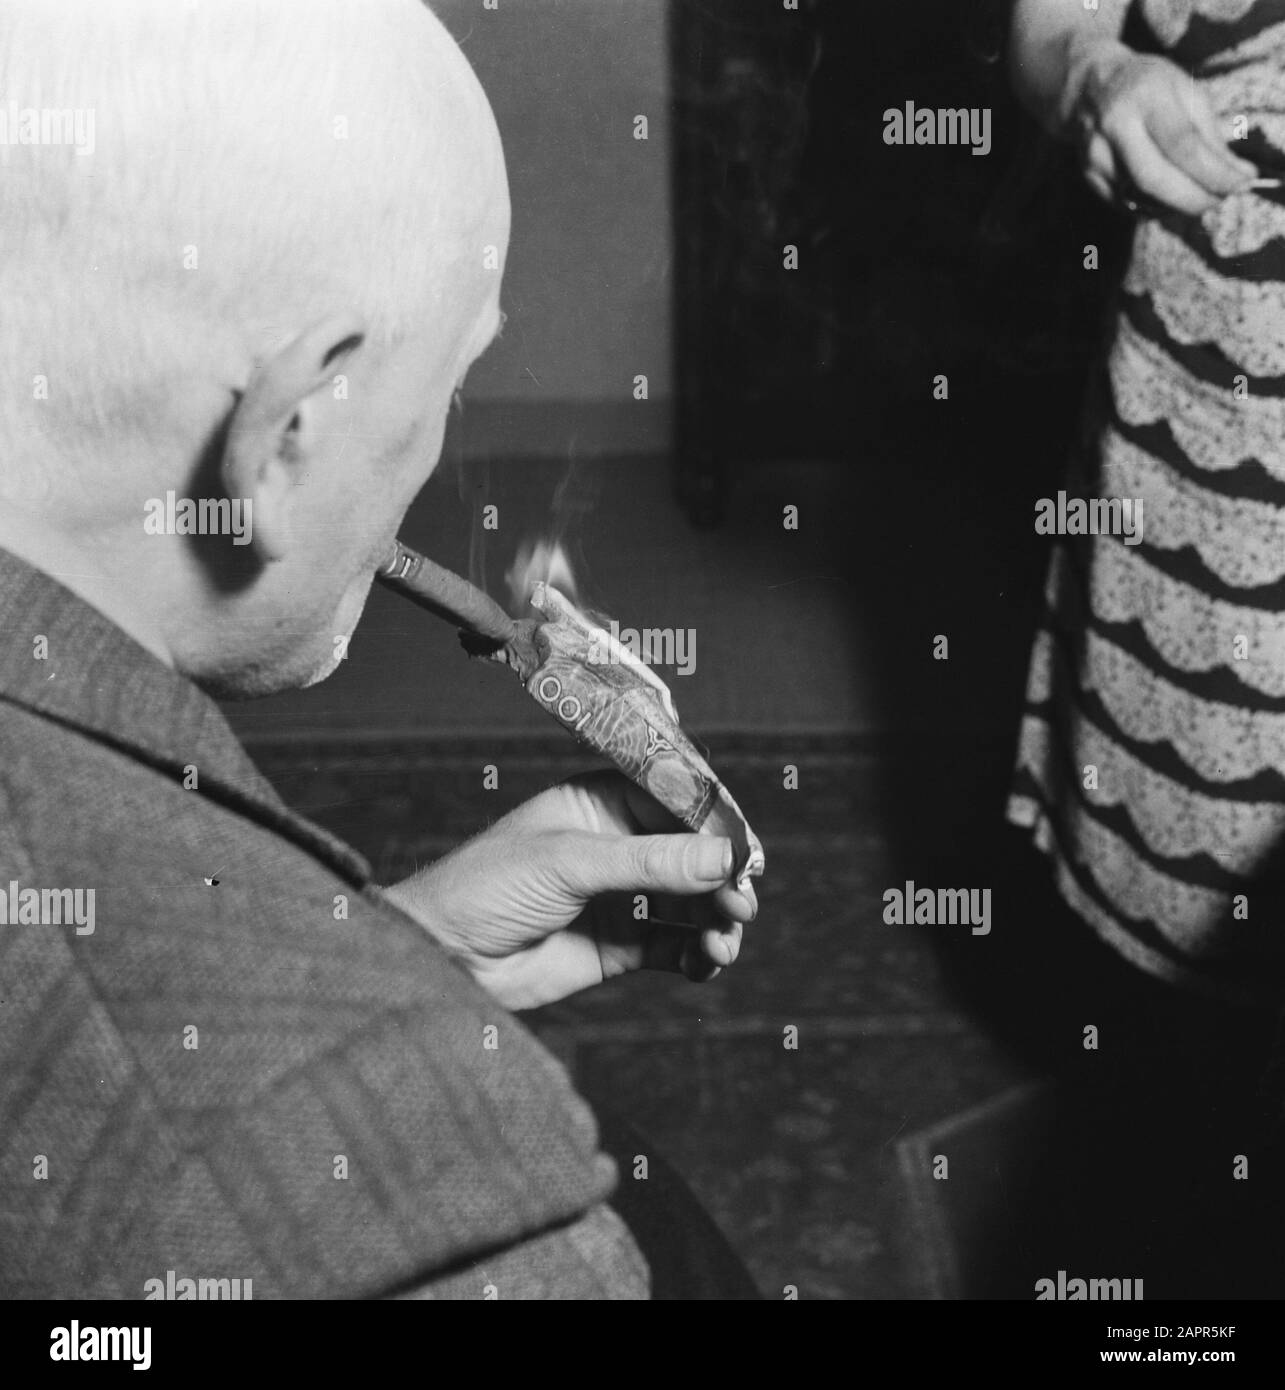 Finance: Money Purge  Man lights cigar with become worthless 100 guilder banknote Date: July 1945 Keywords: banknotes, cash purges, cigars, World War II Stock Photo